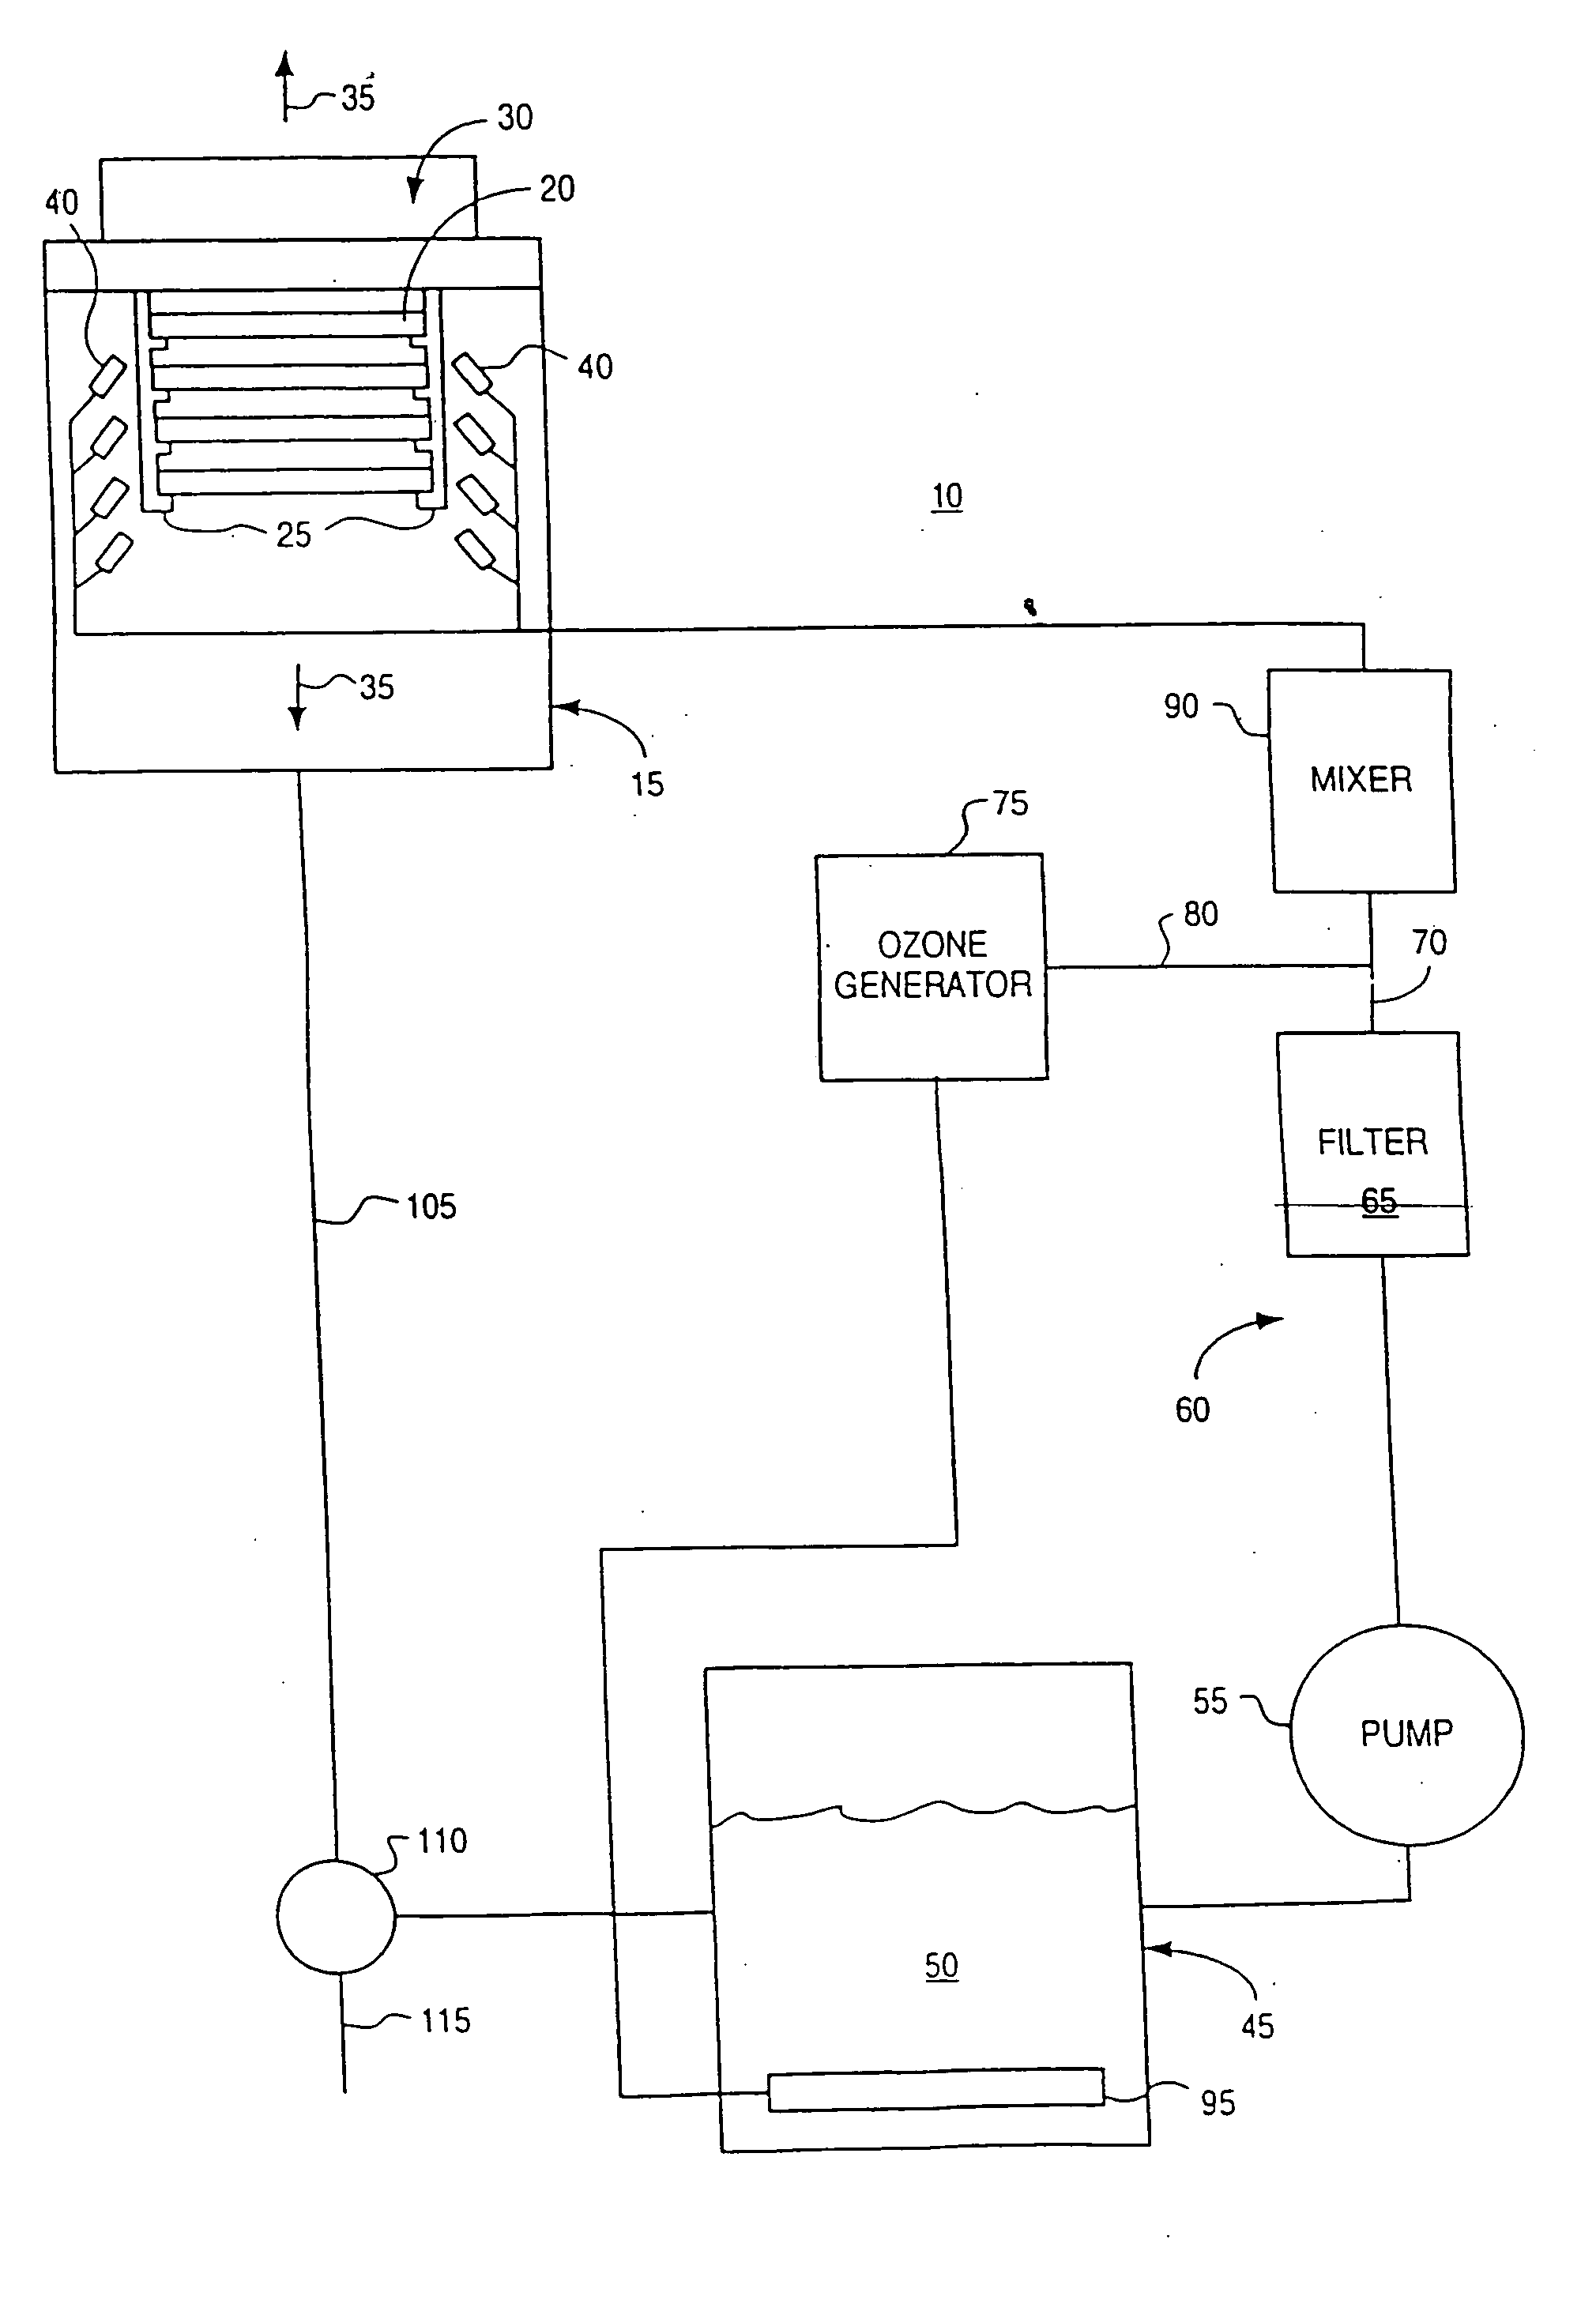 Process and apparatus for treating a workpiece